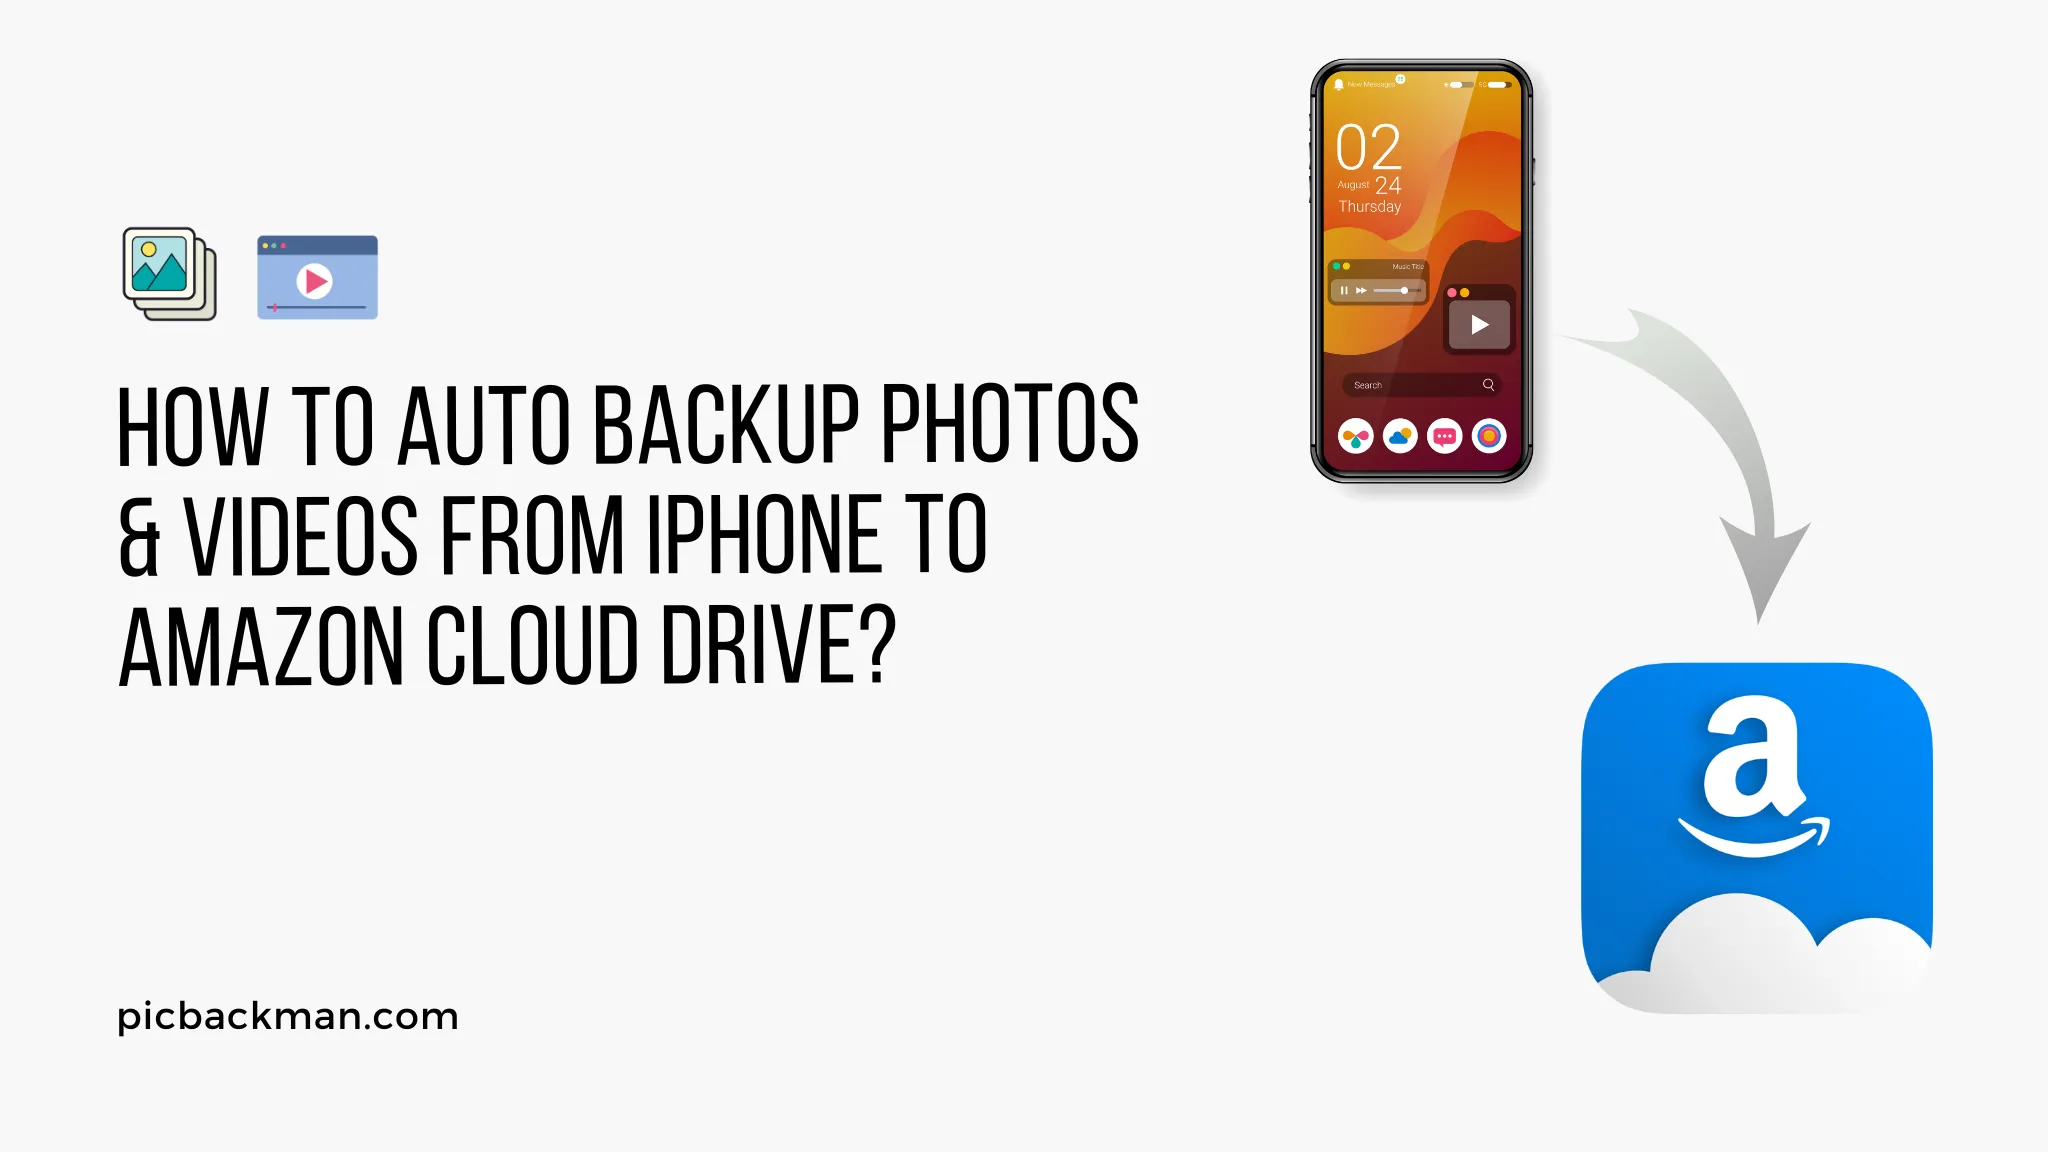 How to Auto Backup Photos and Videos from iPhone to Amazon Cloud Drive